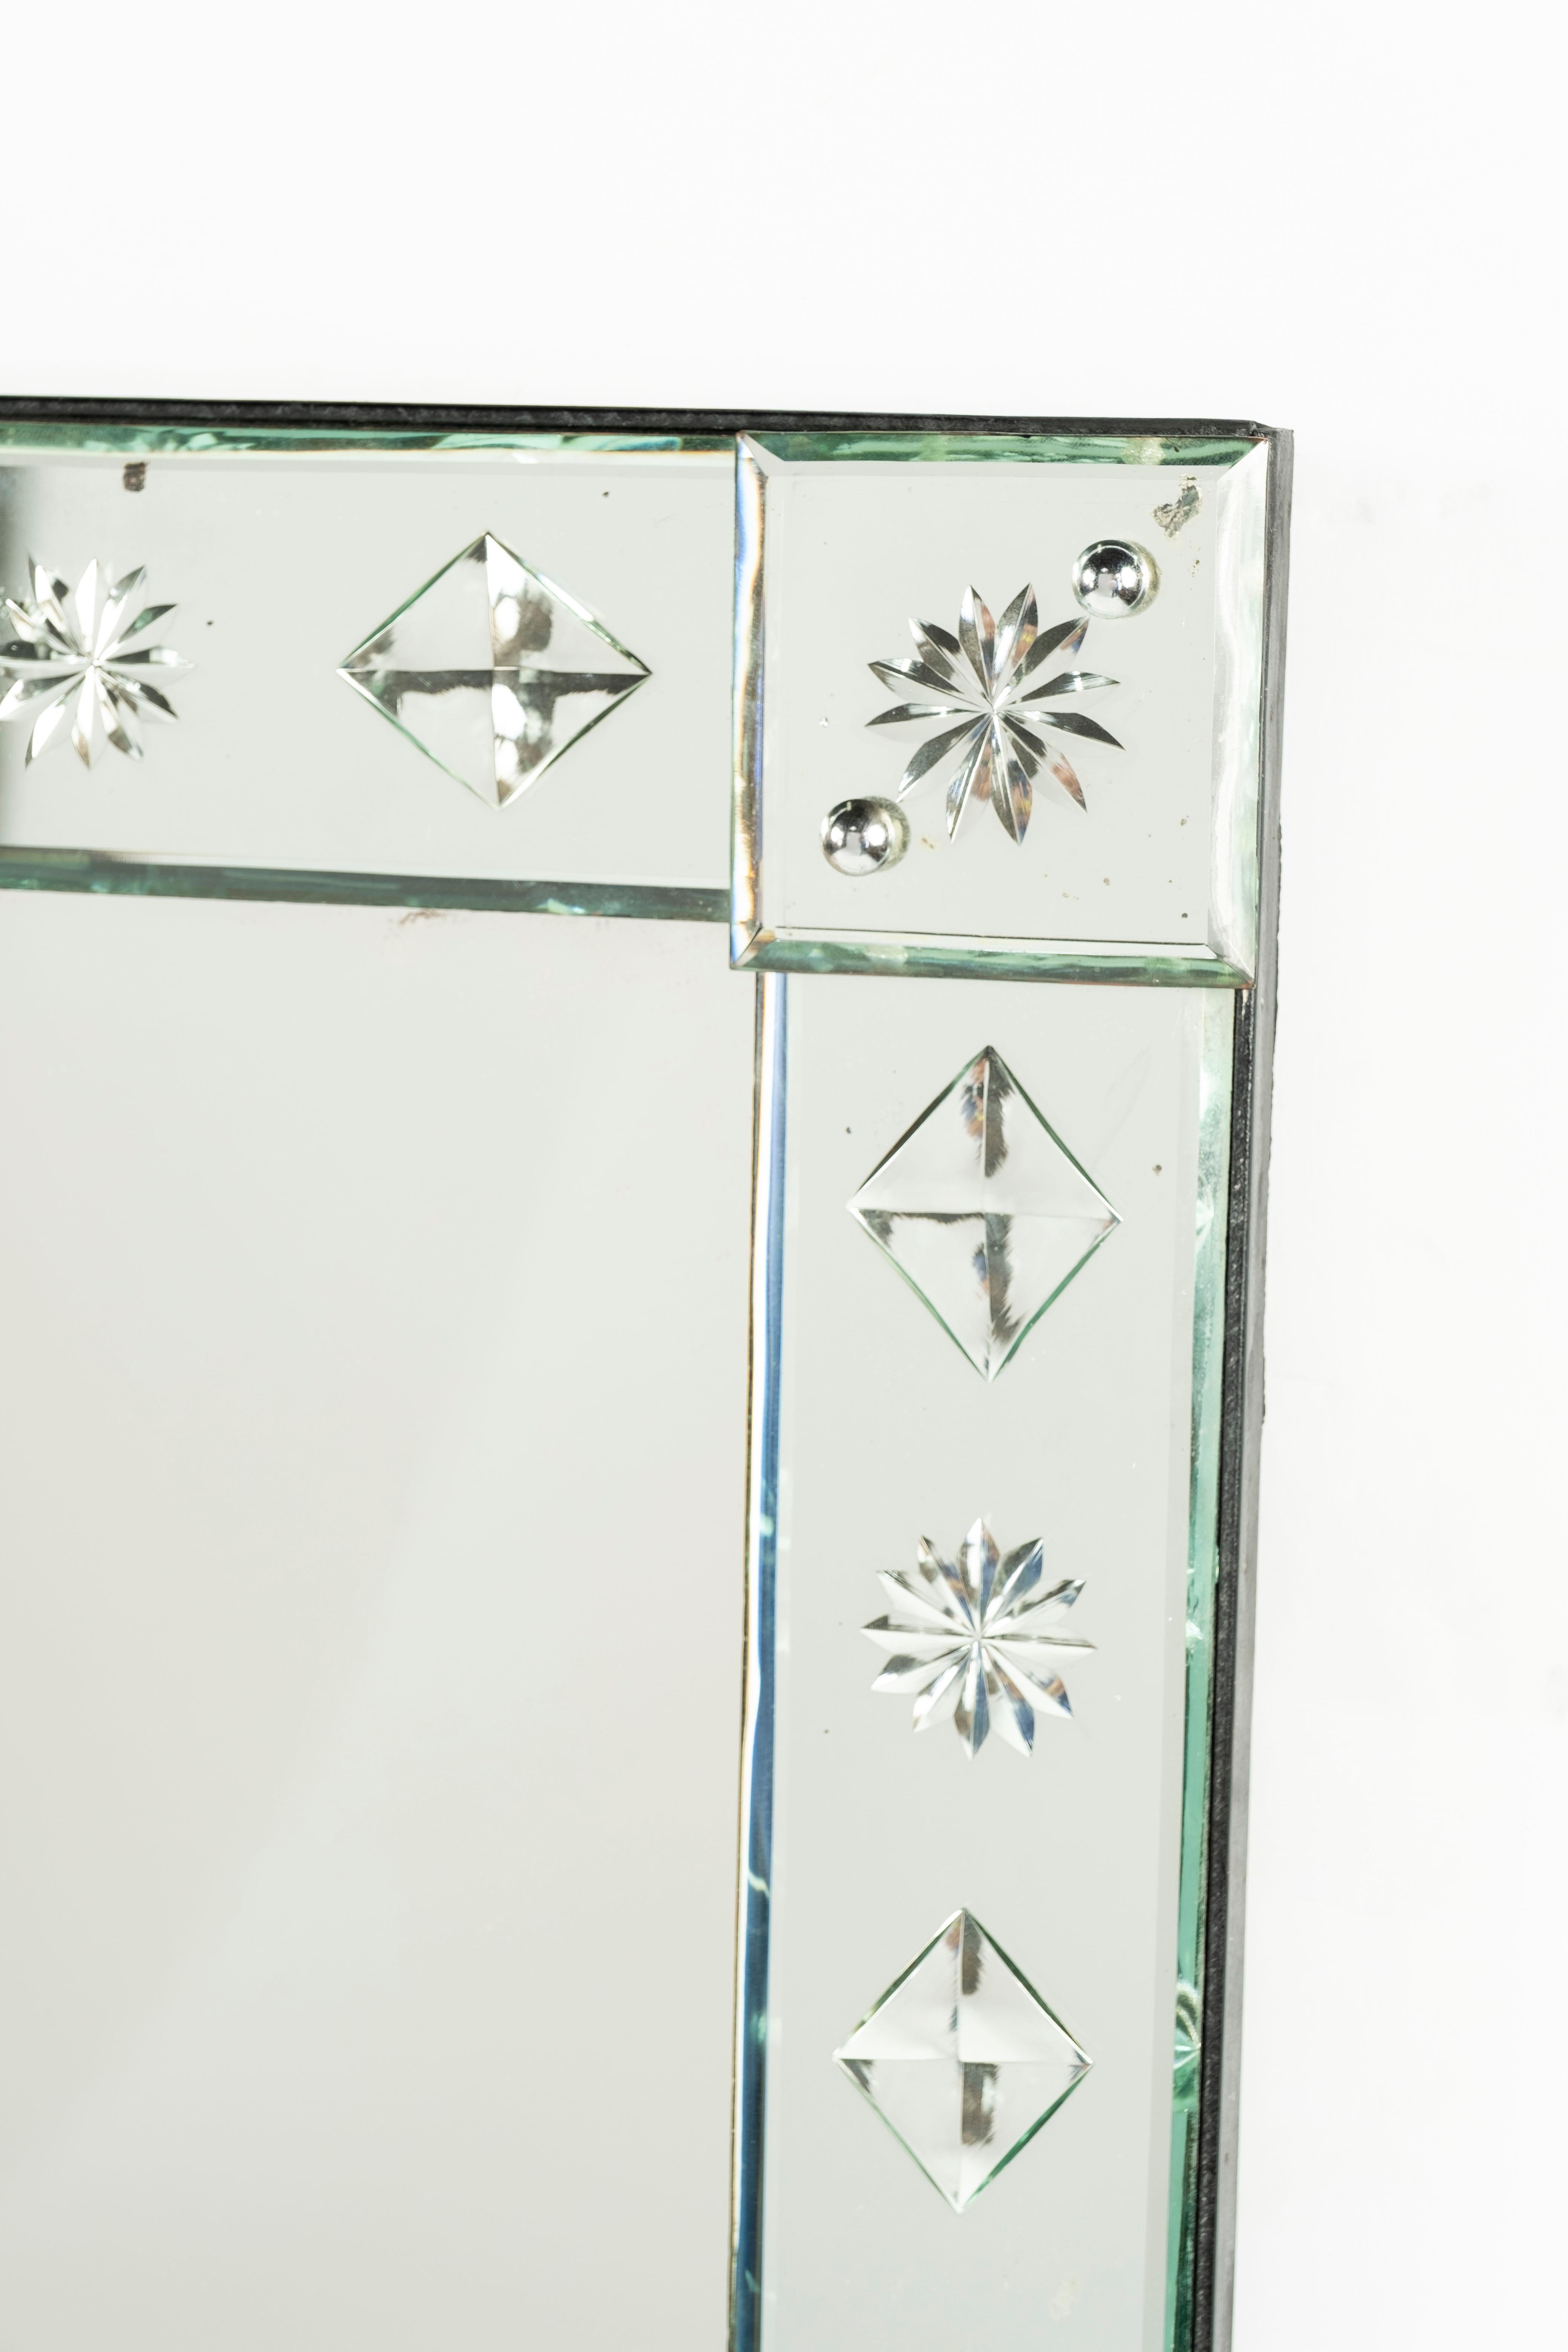 A Venetian frame wall mirror, - the square mirror plate with star and lozenge cut borders. Likely from a Bistro in France.